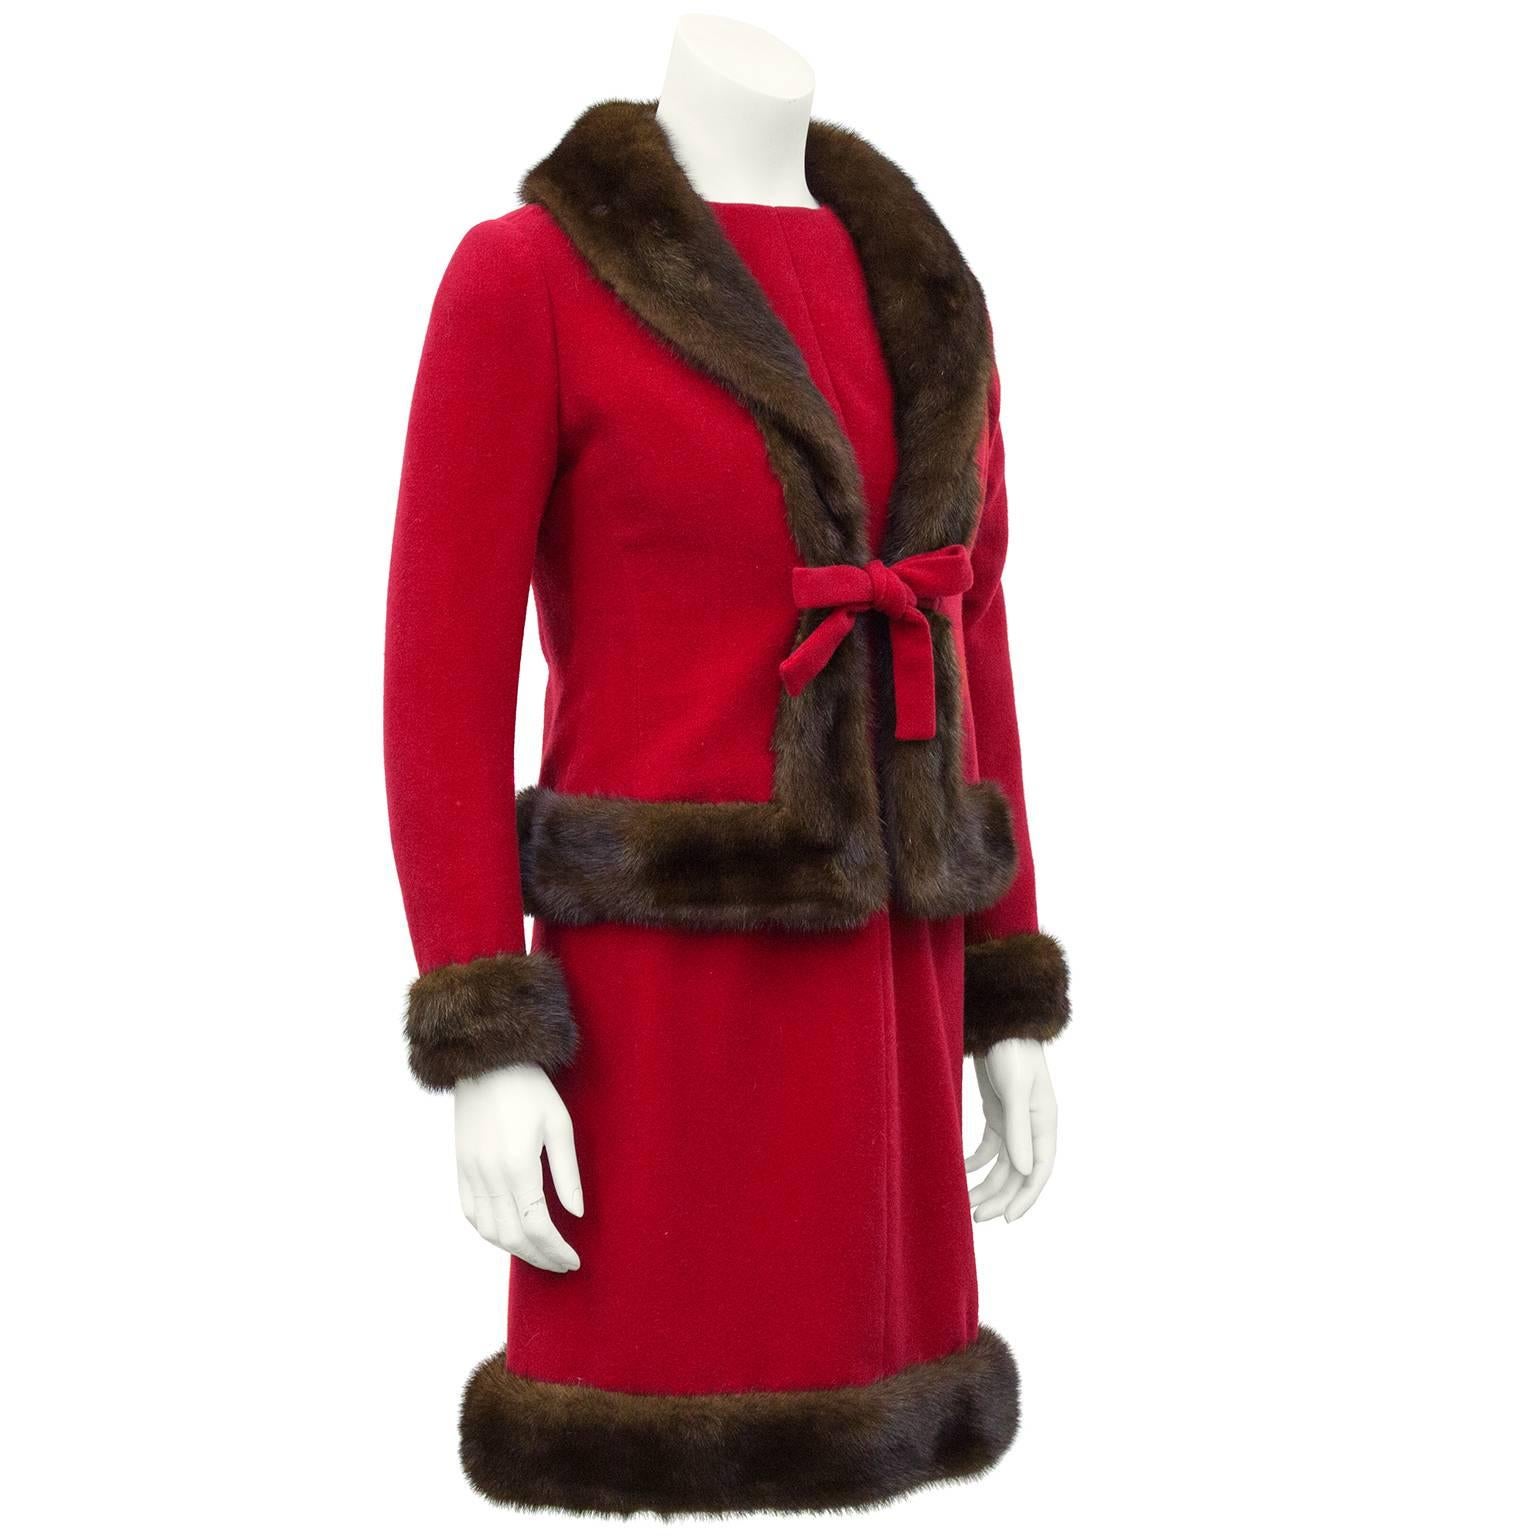 Stunning 1960's Nina Ricci haute couture red wool dress and jacket ensemble with mink trimmed hem. The dress has sheer silk chiffon long sleeves and is fitted through the waist and bodice. Jacket features a mink trimmed shawl collar, hem and cuffs